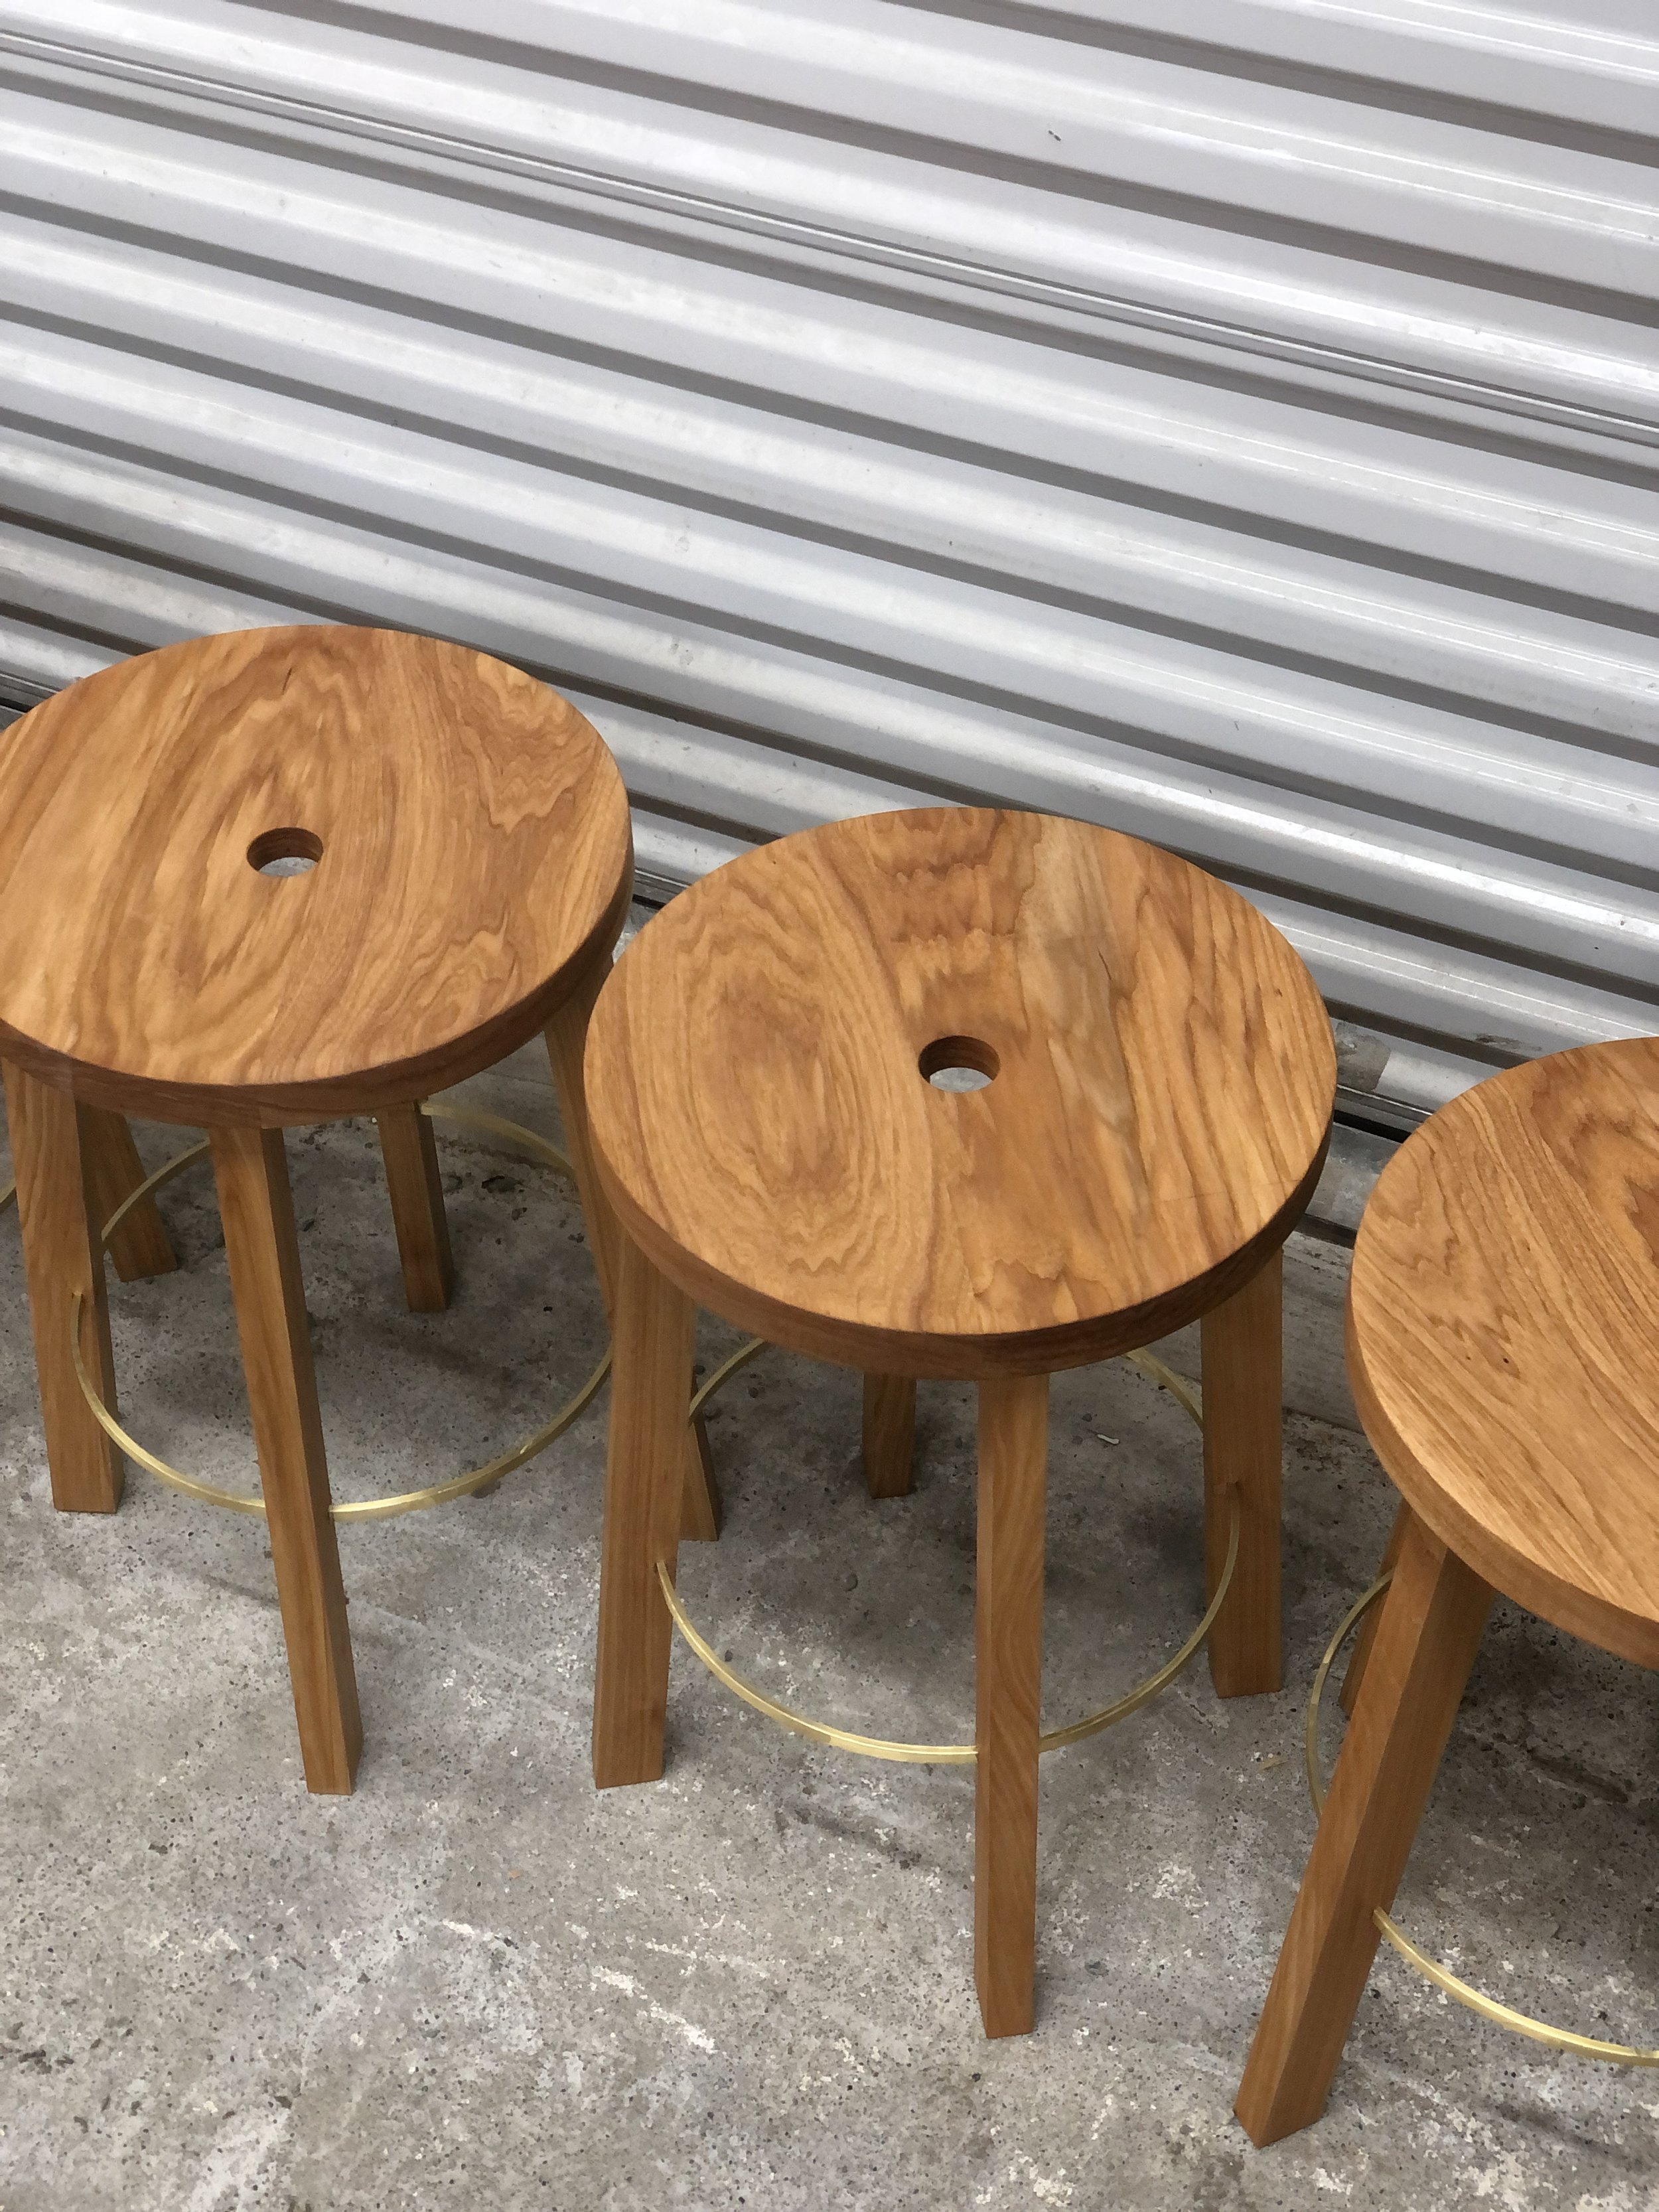 PlyPly_Furniture_Stools2.JPG